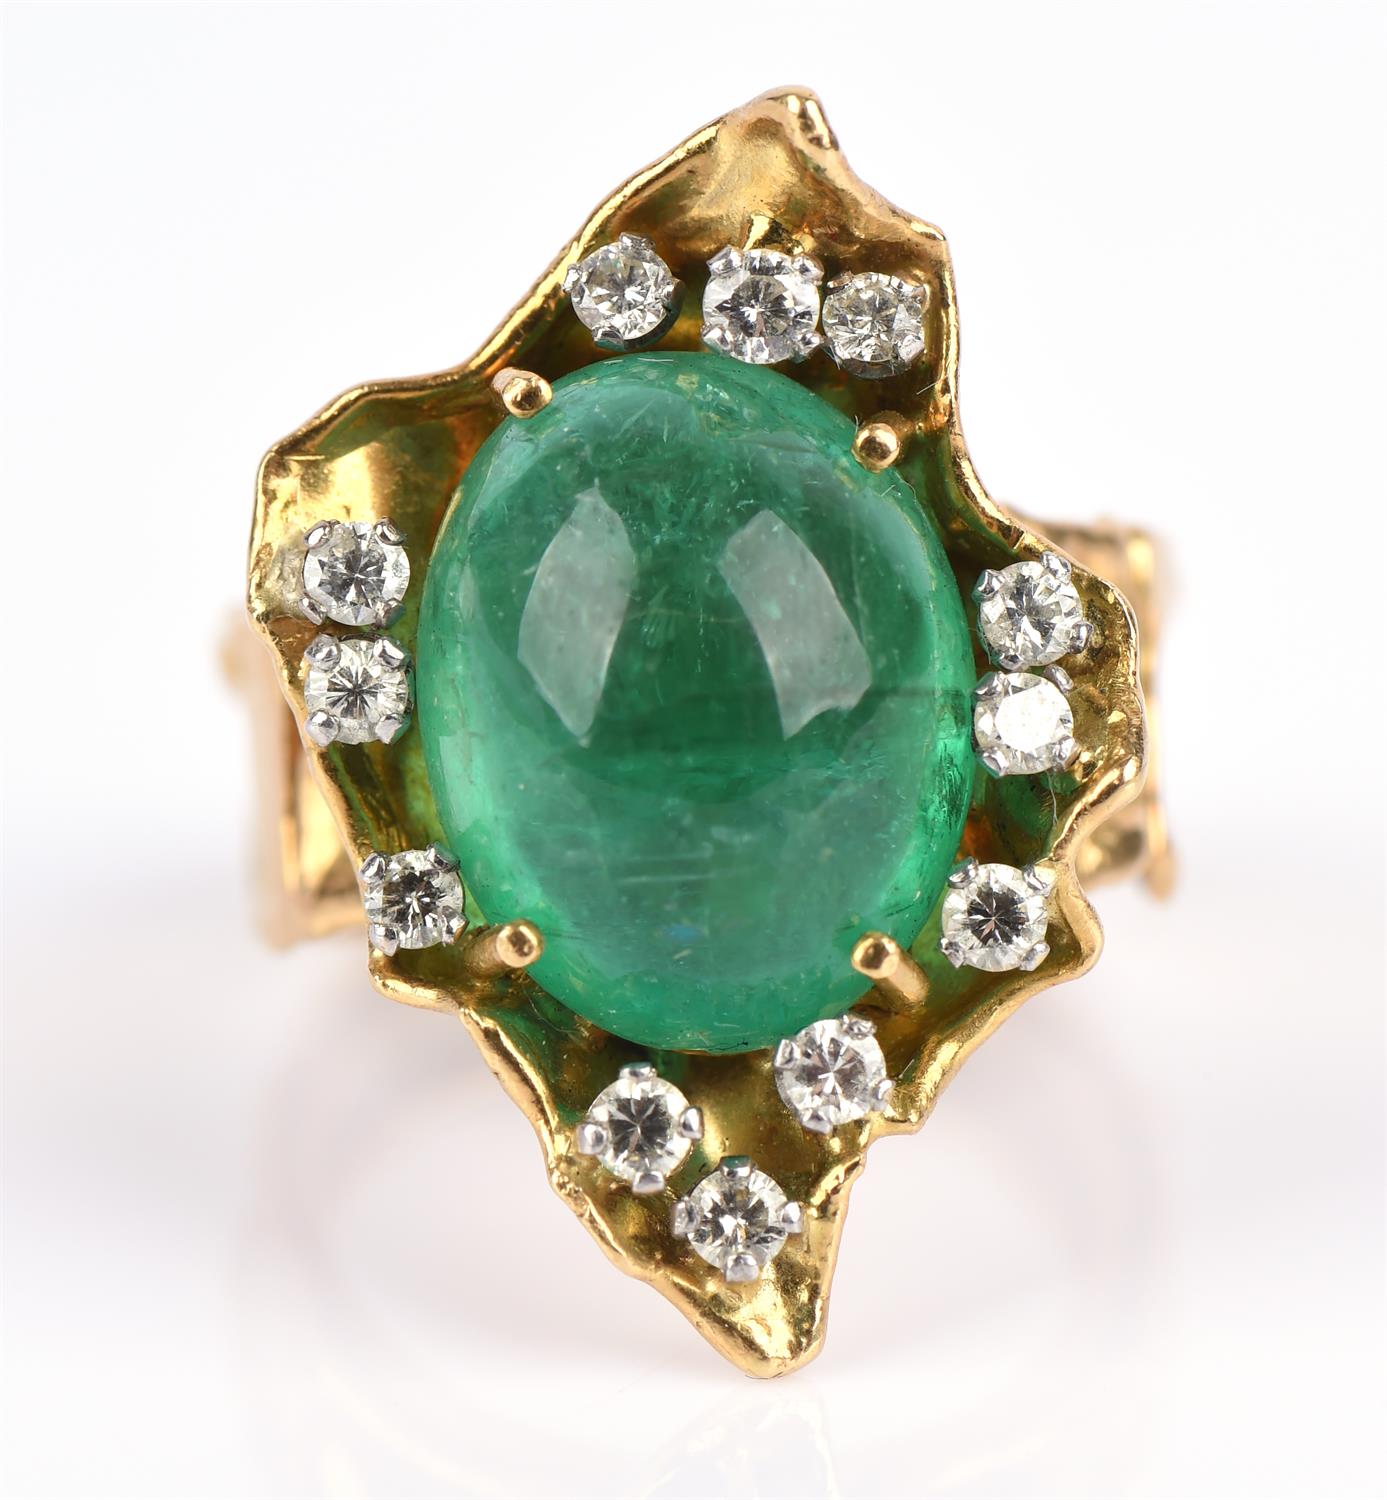 George Weil vintage emerald dress ring, central oval cabochon cut emerald estimated weight 13.